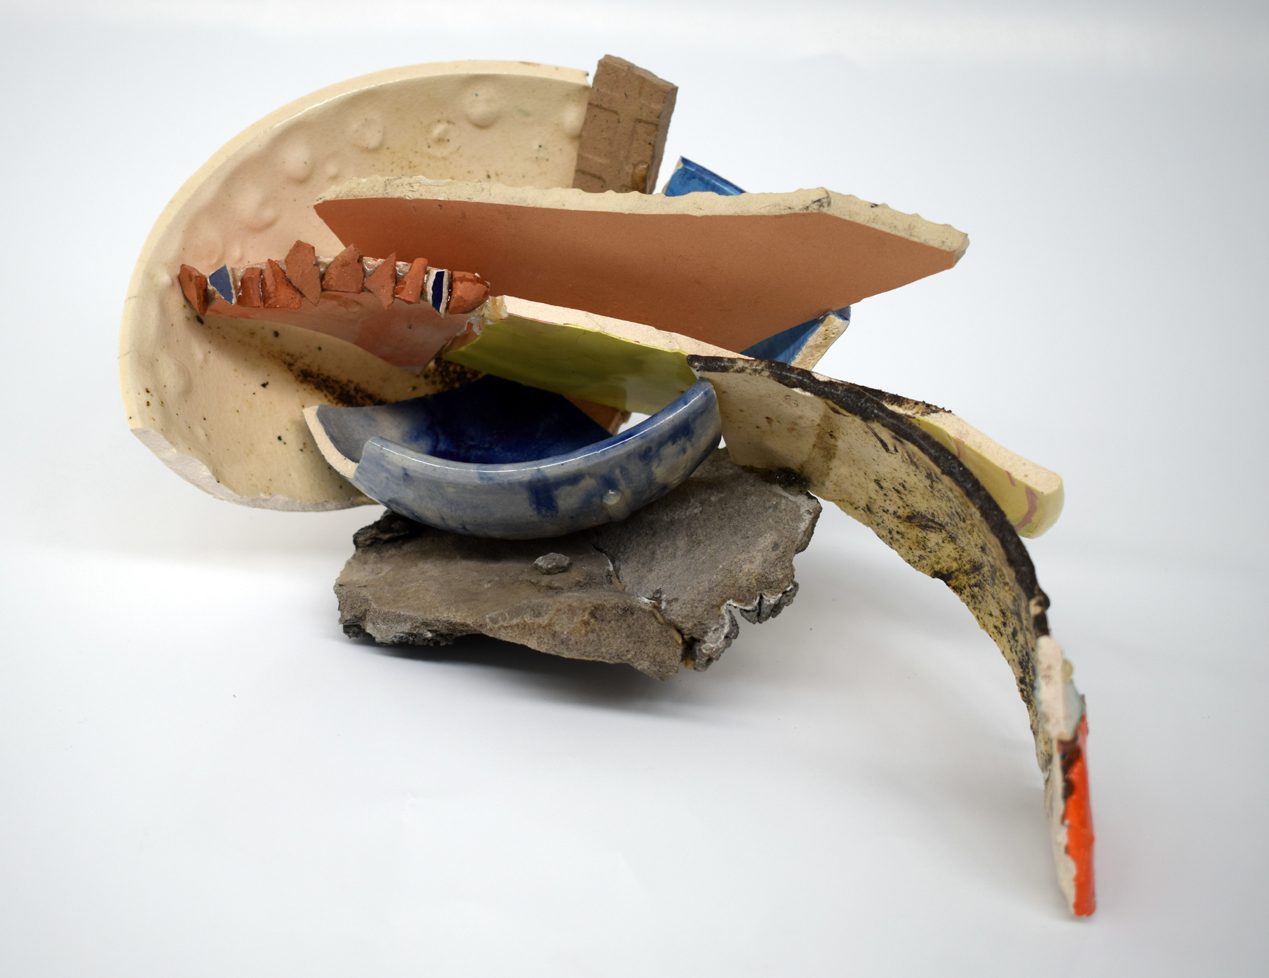 Anthea Williams, Reclining Figure 3, 2019, Ceramic, cement and adhesive, 12 x 28 x 17 cm, Courtesy of the artist.